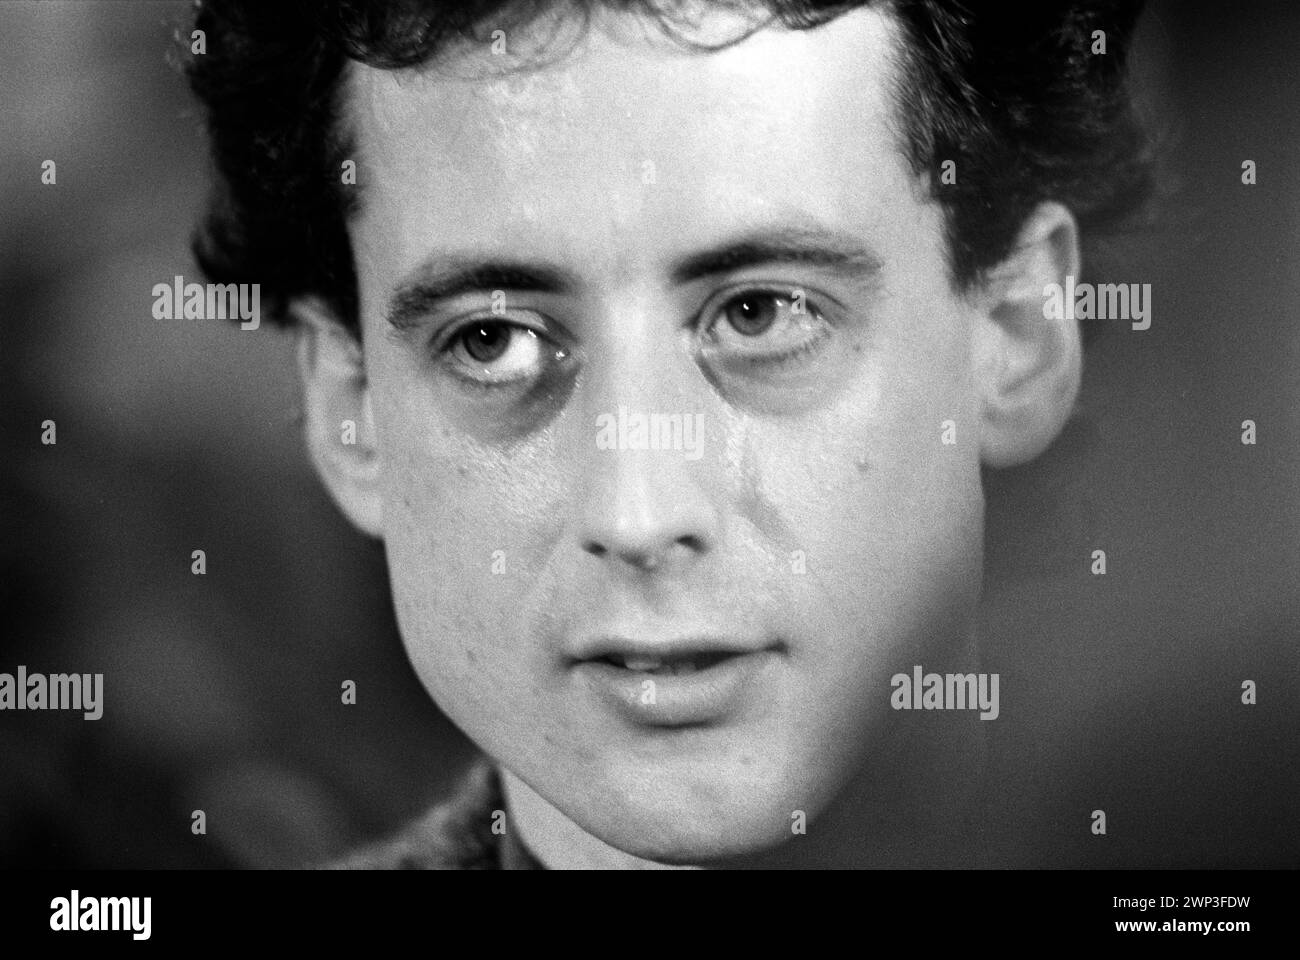 London, England 24th February 1983. Peter Tatchell portrait the Gay Rights campaigner seeks to be elected at the Bermondsey by election South London to the Labour party as a MP. 1980s HOMER SYKES Stock Photo